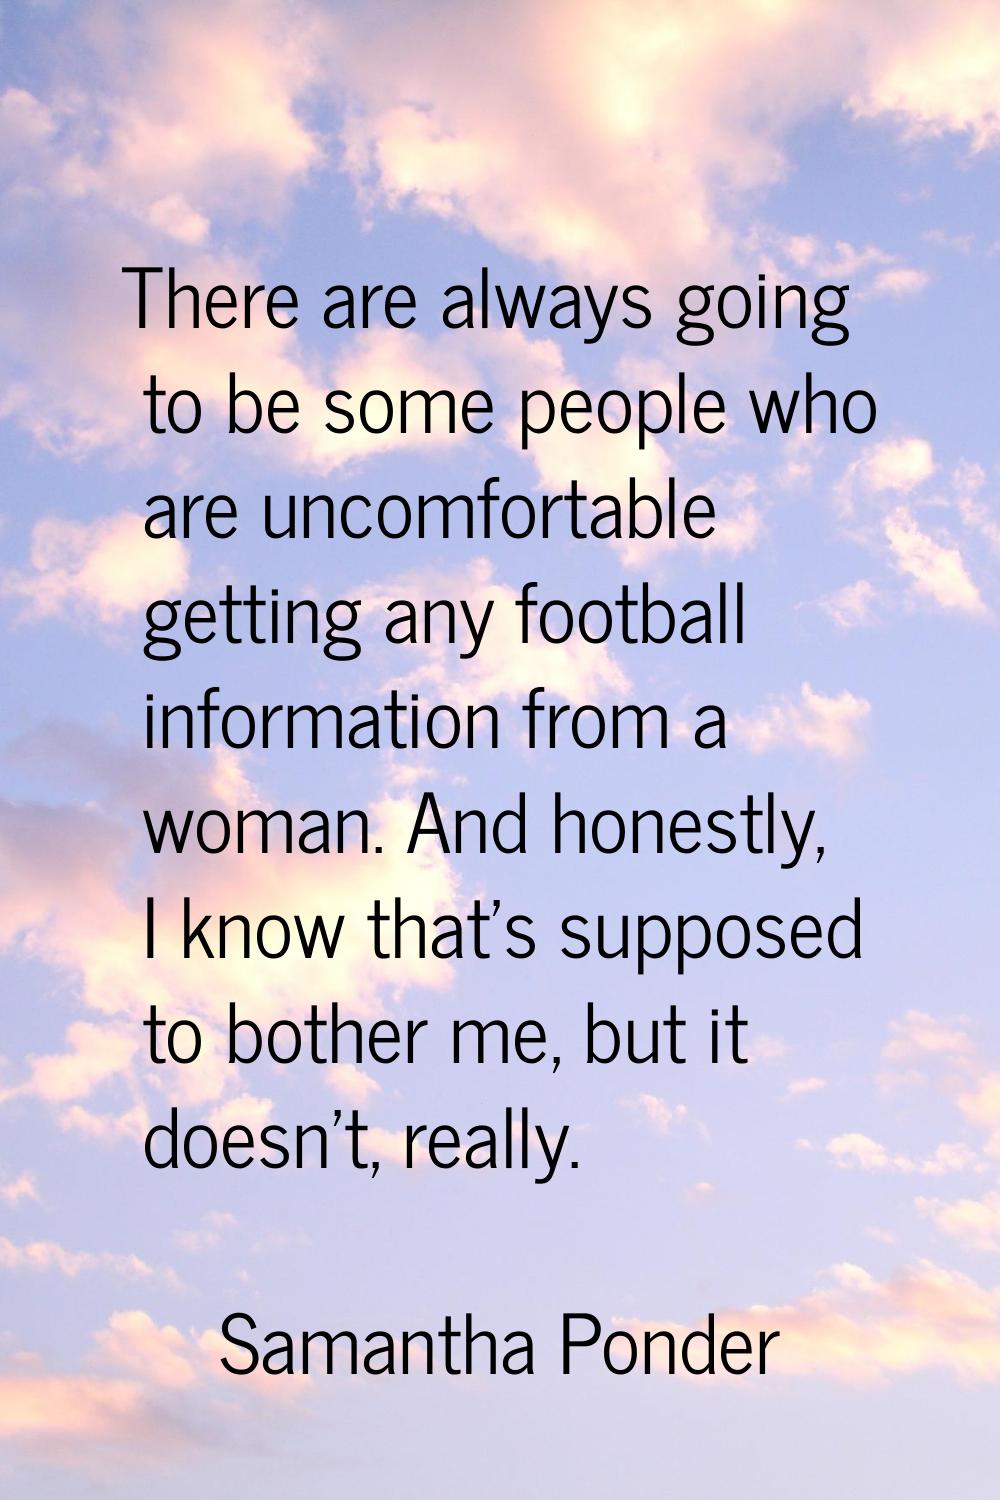 There are always going to be some people who are uncomfortable getting any football information fro